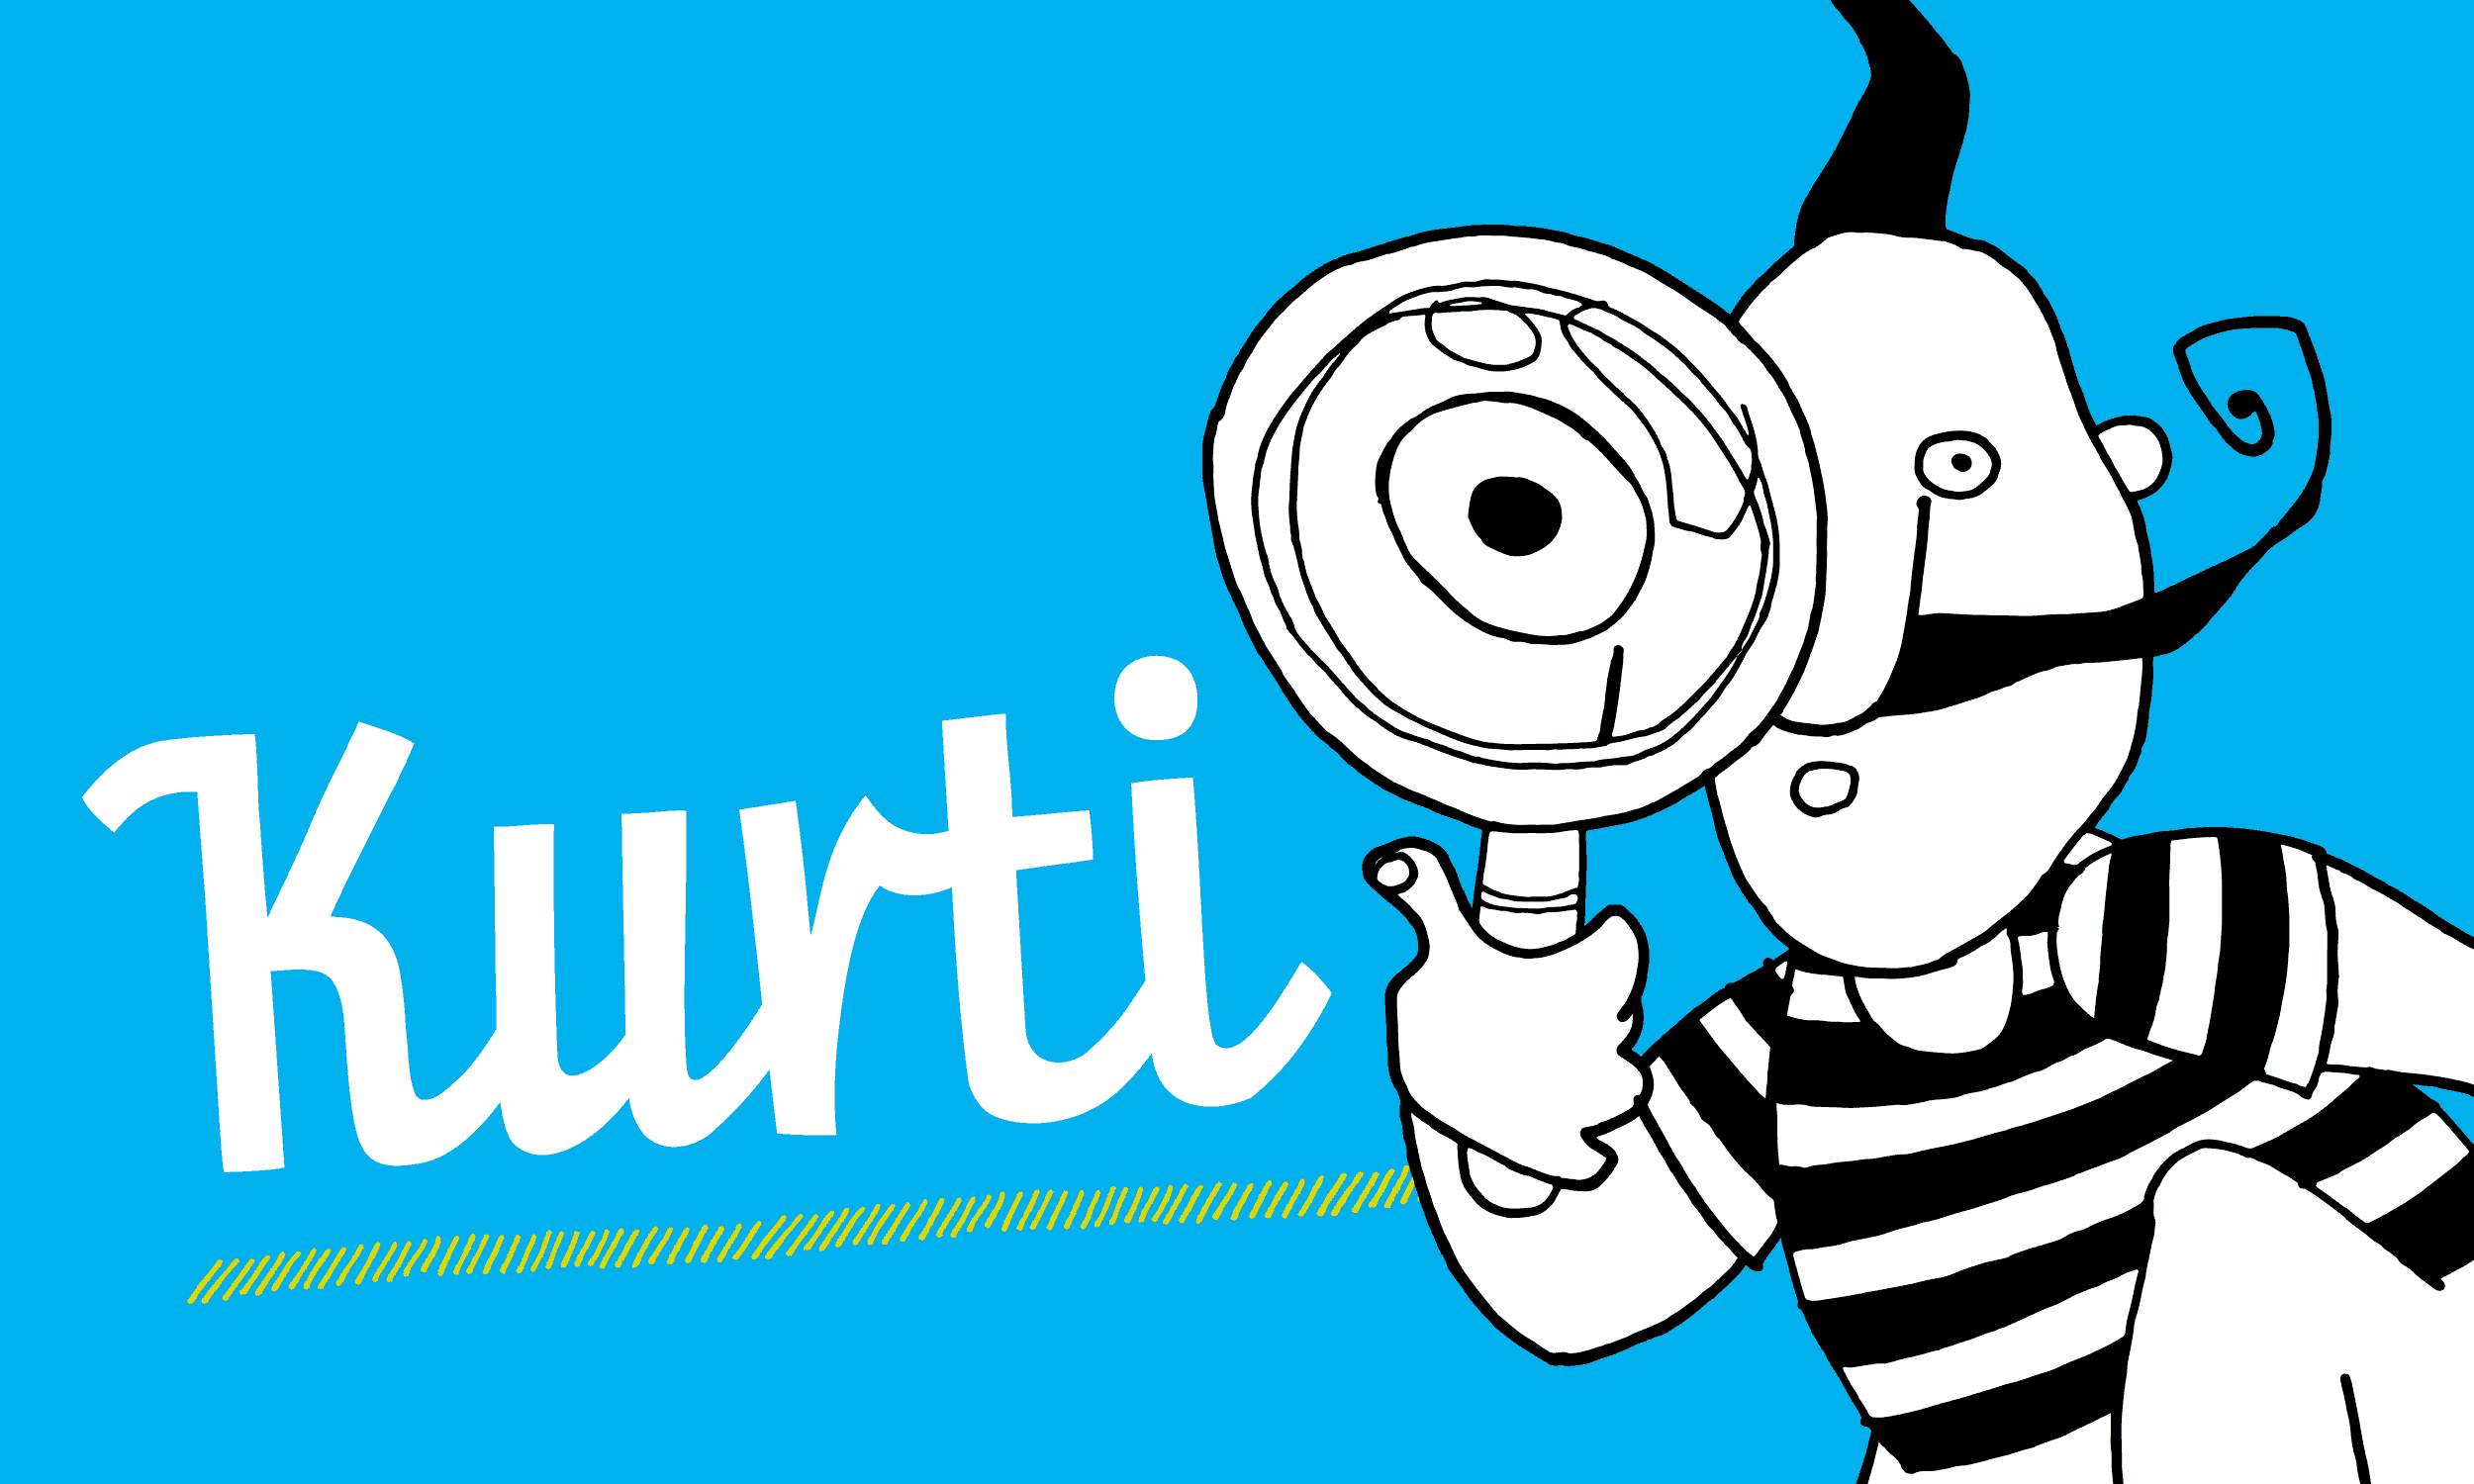 black and white illustration of the figure Kurti on a blue background, to the left the lettering "Kurti" in white